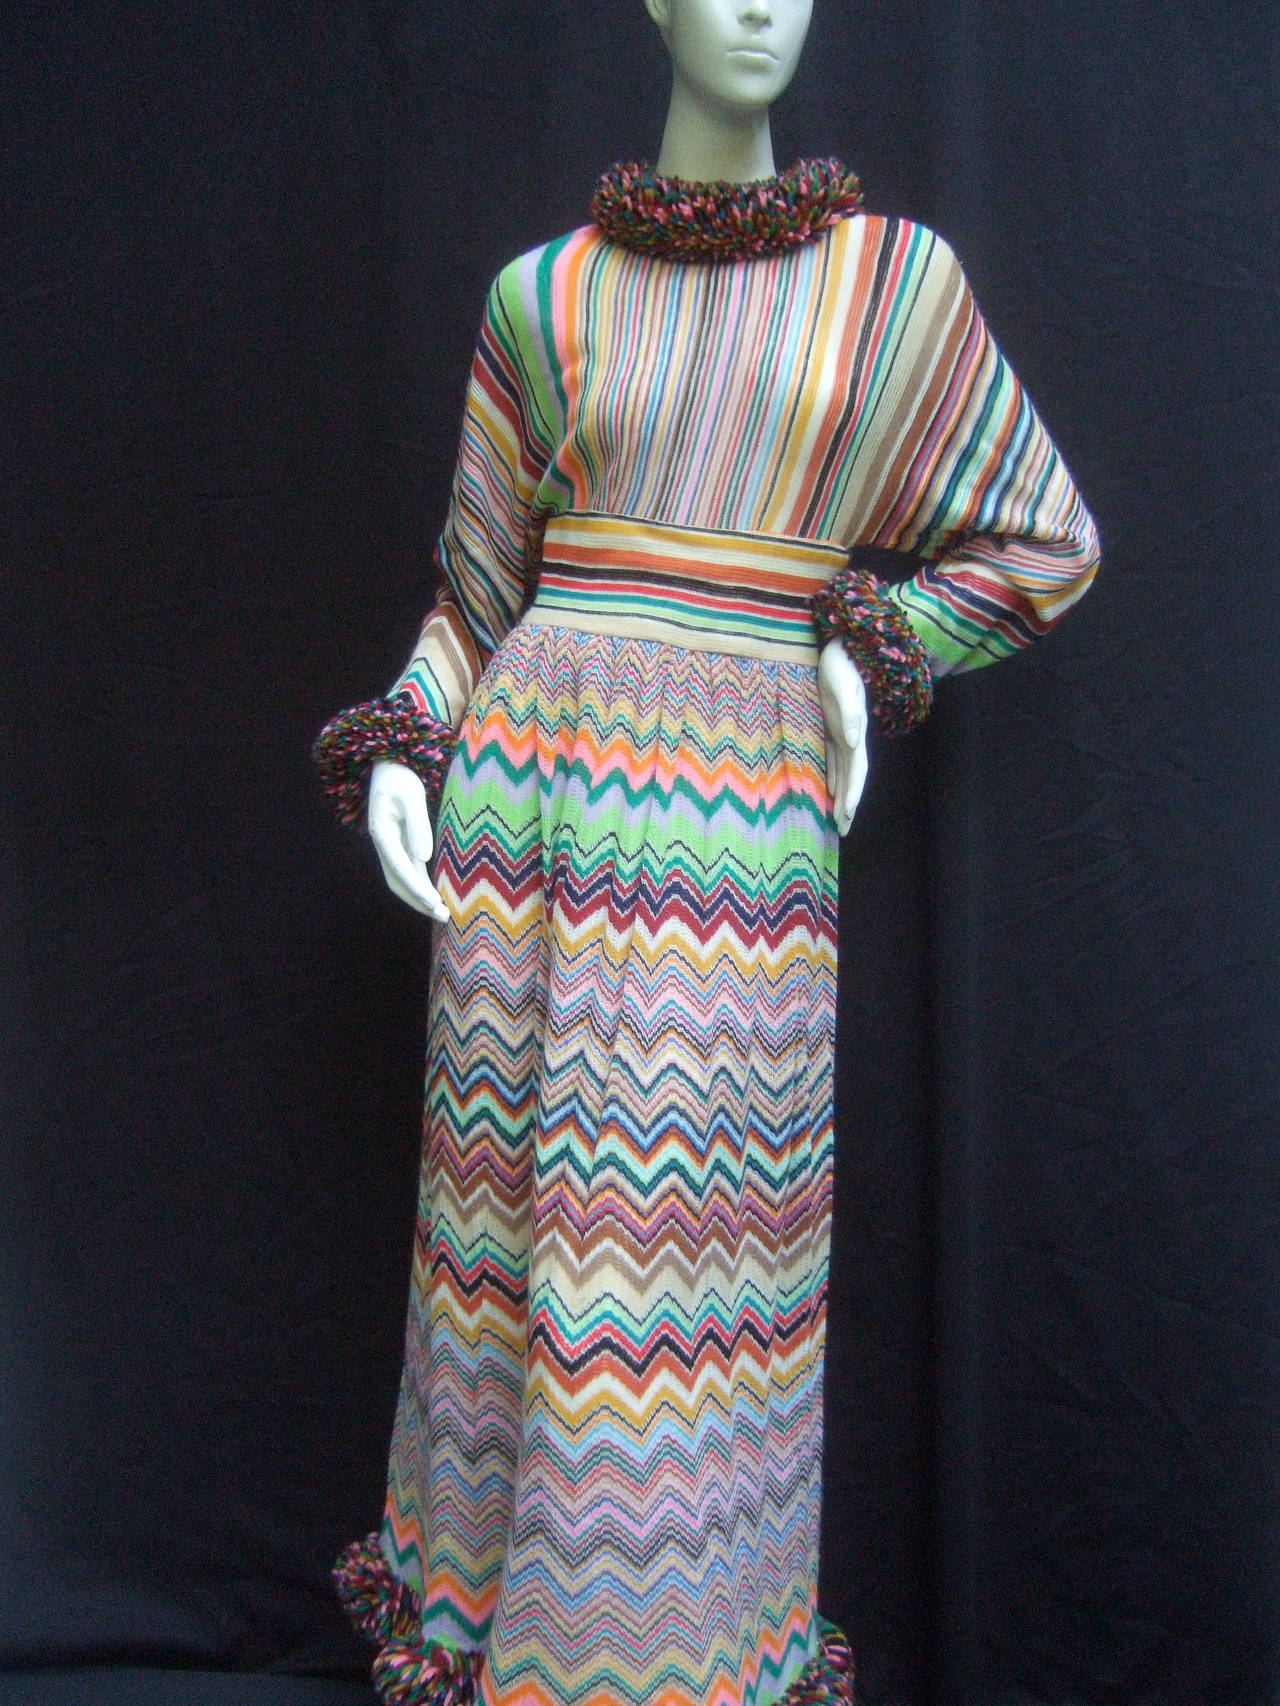 1970s Striped knit chevron maxi gown 
The chic retro knit gown is designed with
vertical, horizontal and zig-zag chevron 
stripes in a collage of earth tone and pastel 
colors 

The collar, cuffs and hemline are accented
with frayed fringe